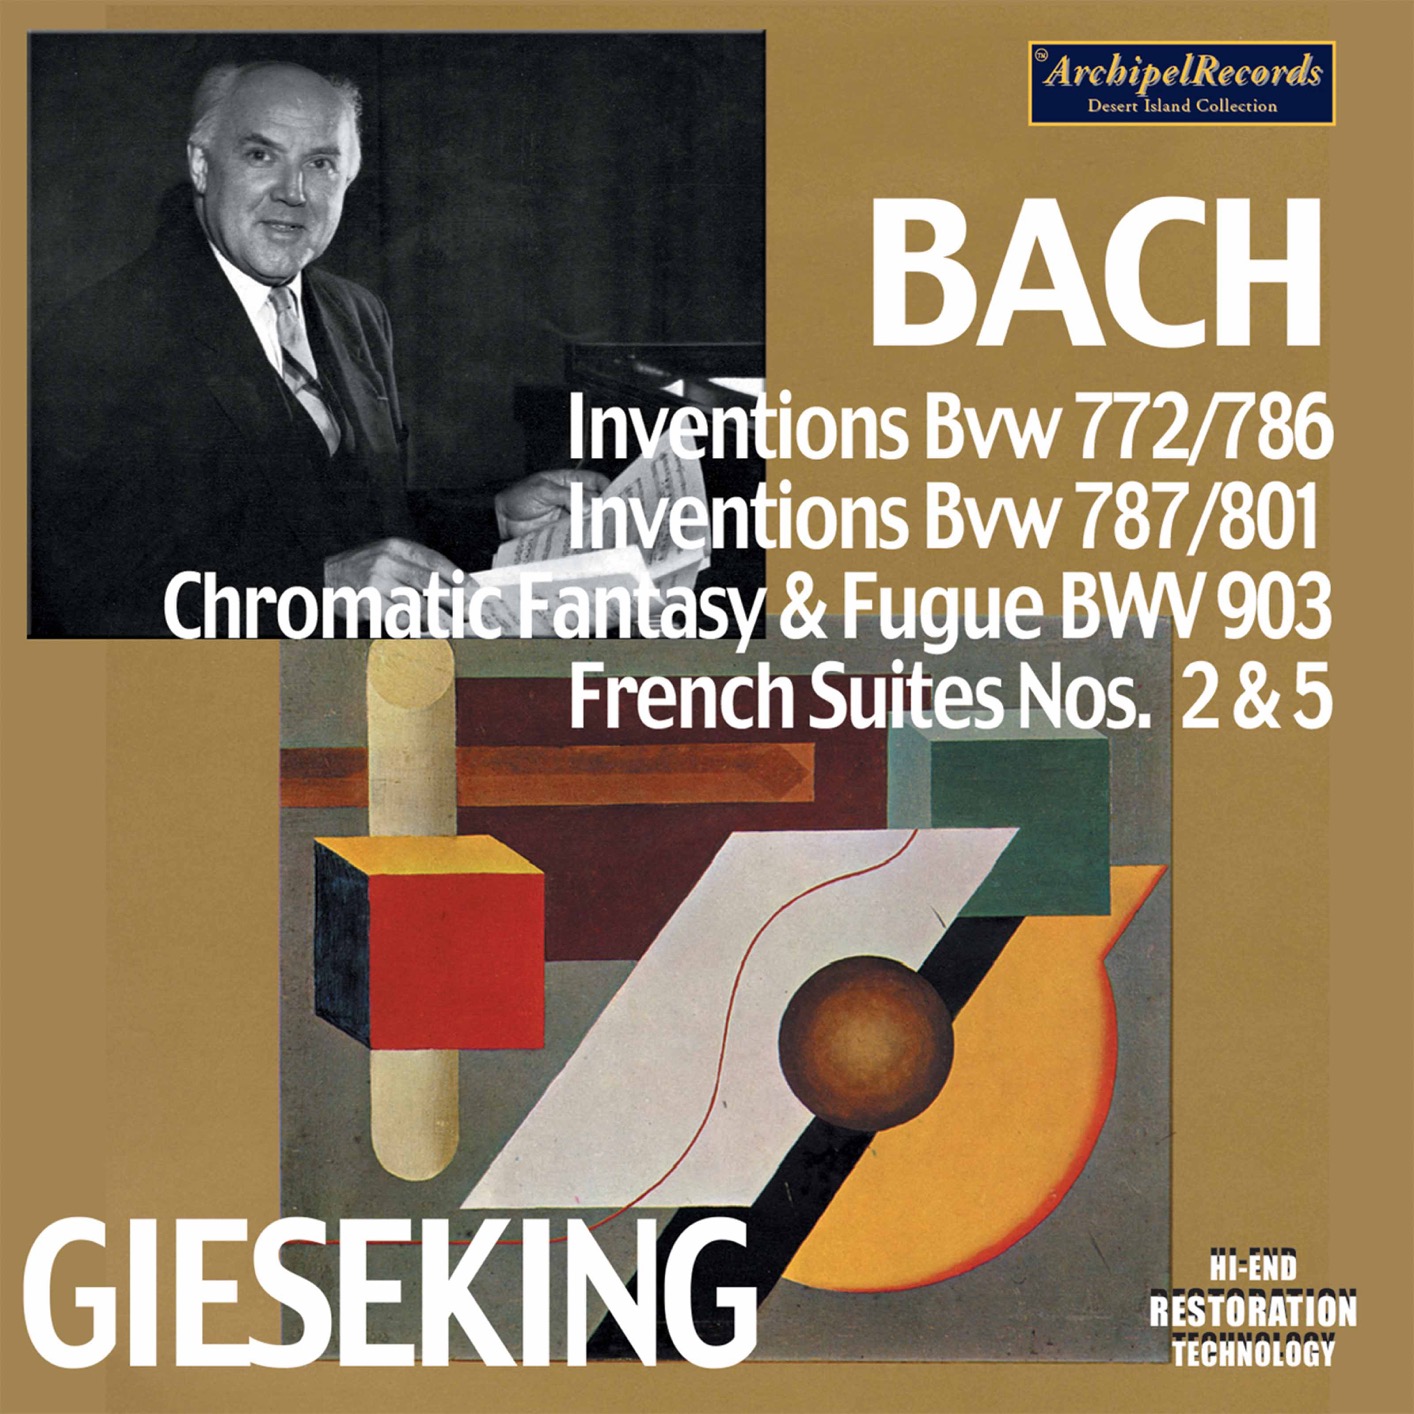 Walter Gieseking - J.S. Bach: Piano Works (2021 Remastered Version) (2021) [FLAC 24bit/48kHz]